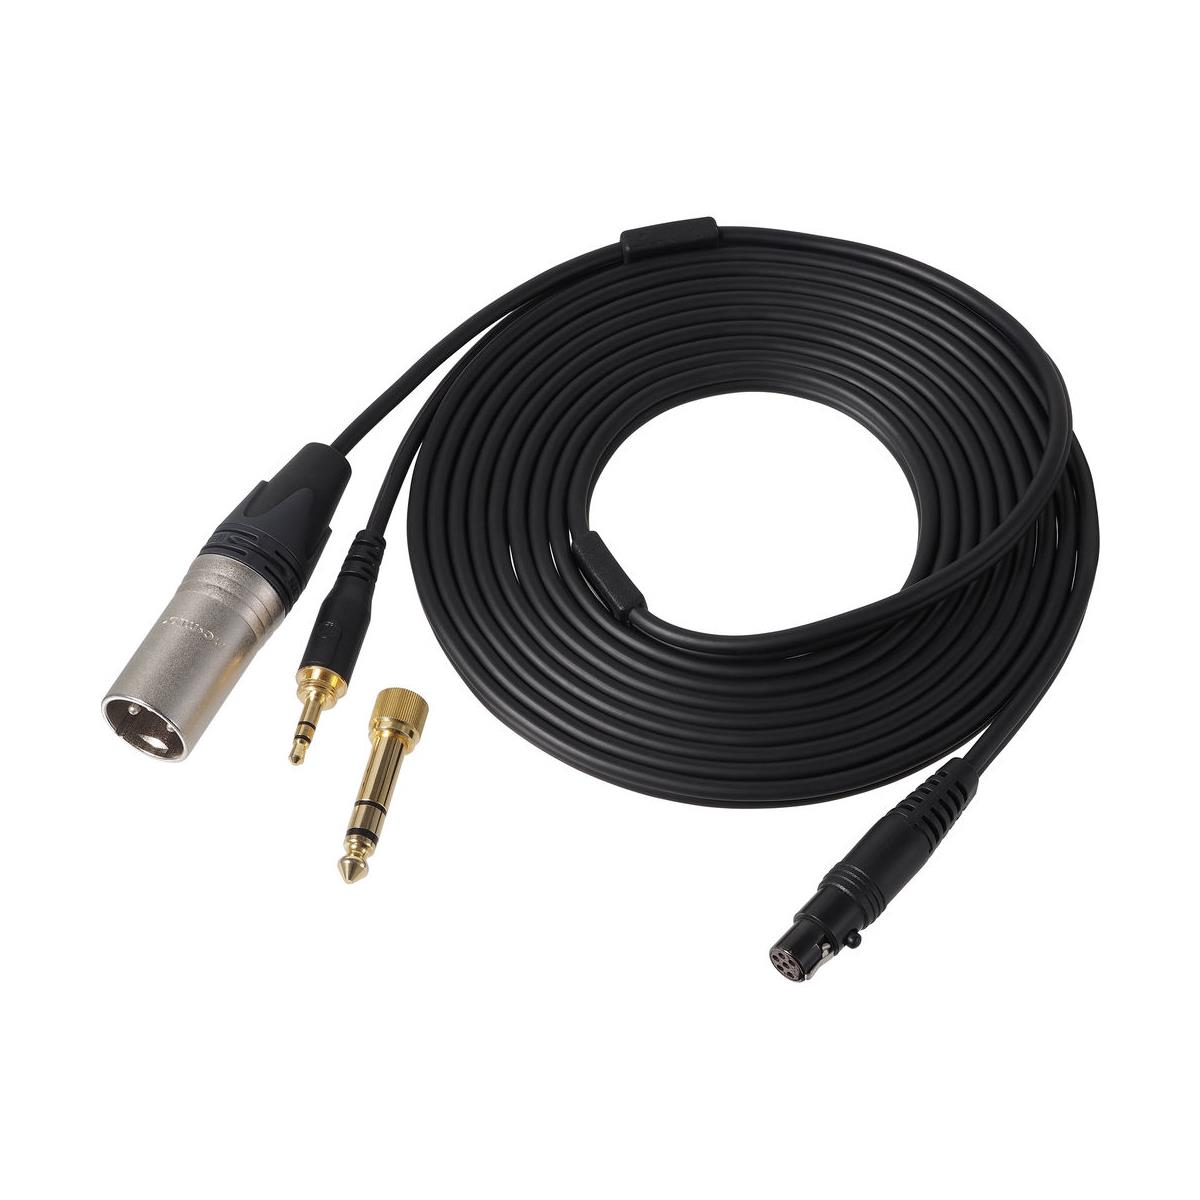 Image of Audio-Technica BPCB2 Replacement Cable for BPHS2 Headset